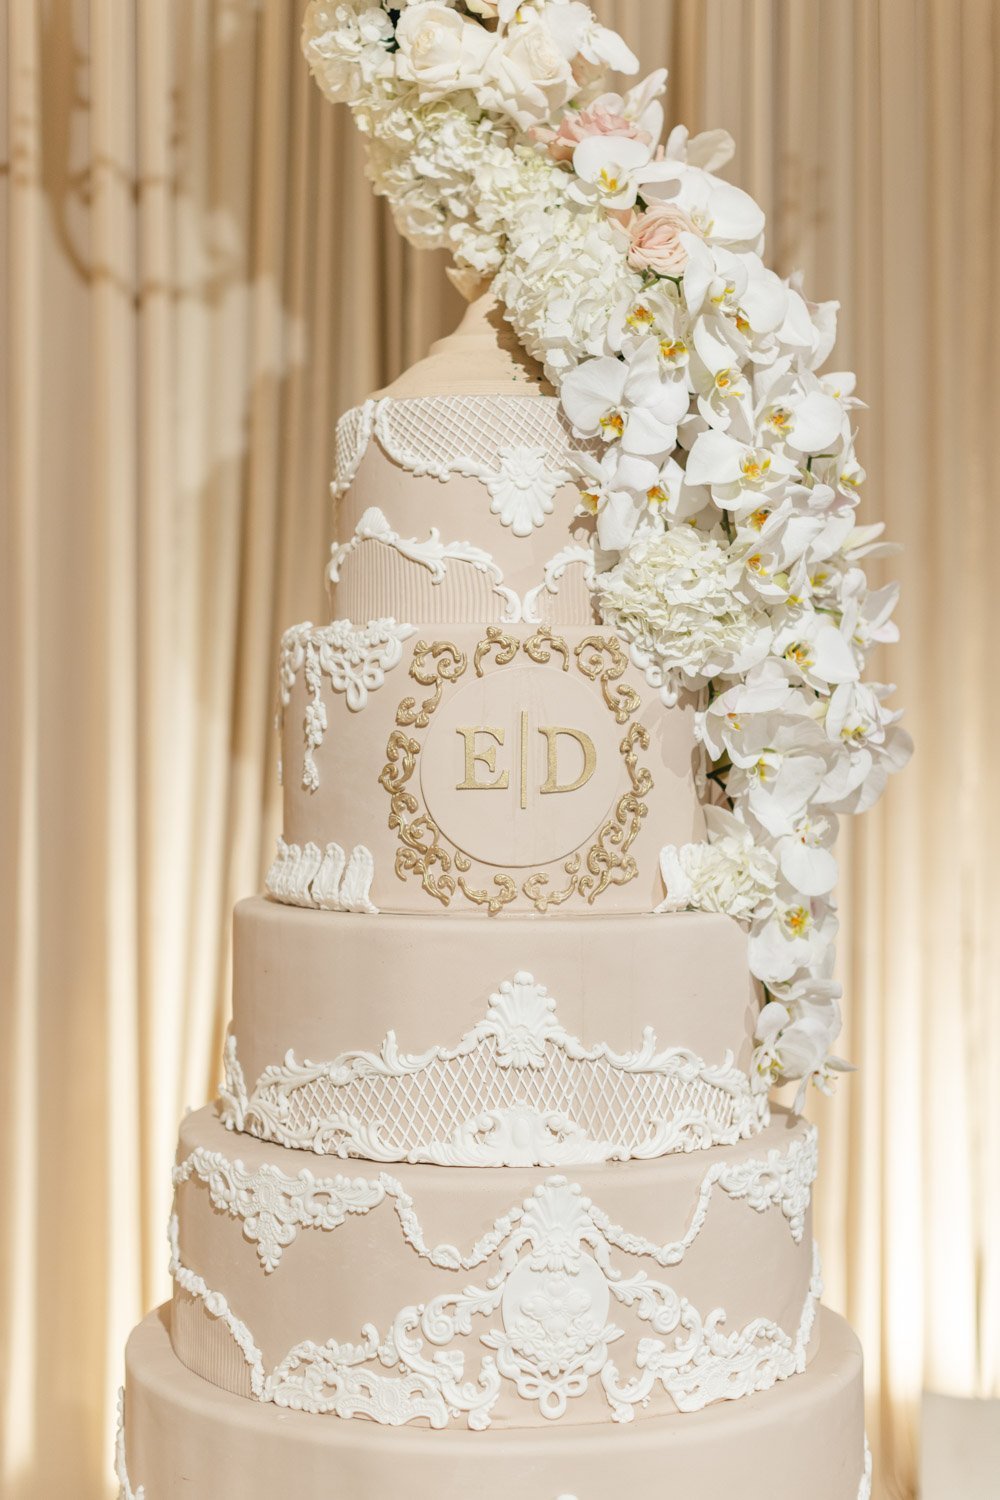 Pale pink and cream roses with white orchids drape a five layer stunning wedding cake with lace and gold accents at the Ritz-Carlton Laguna Niguel